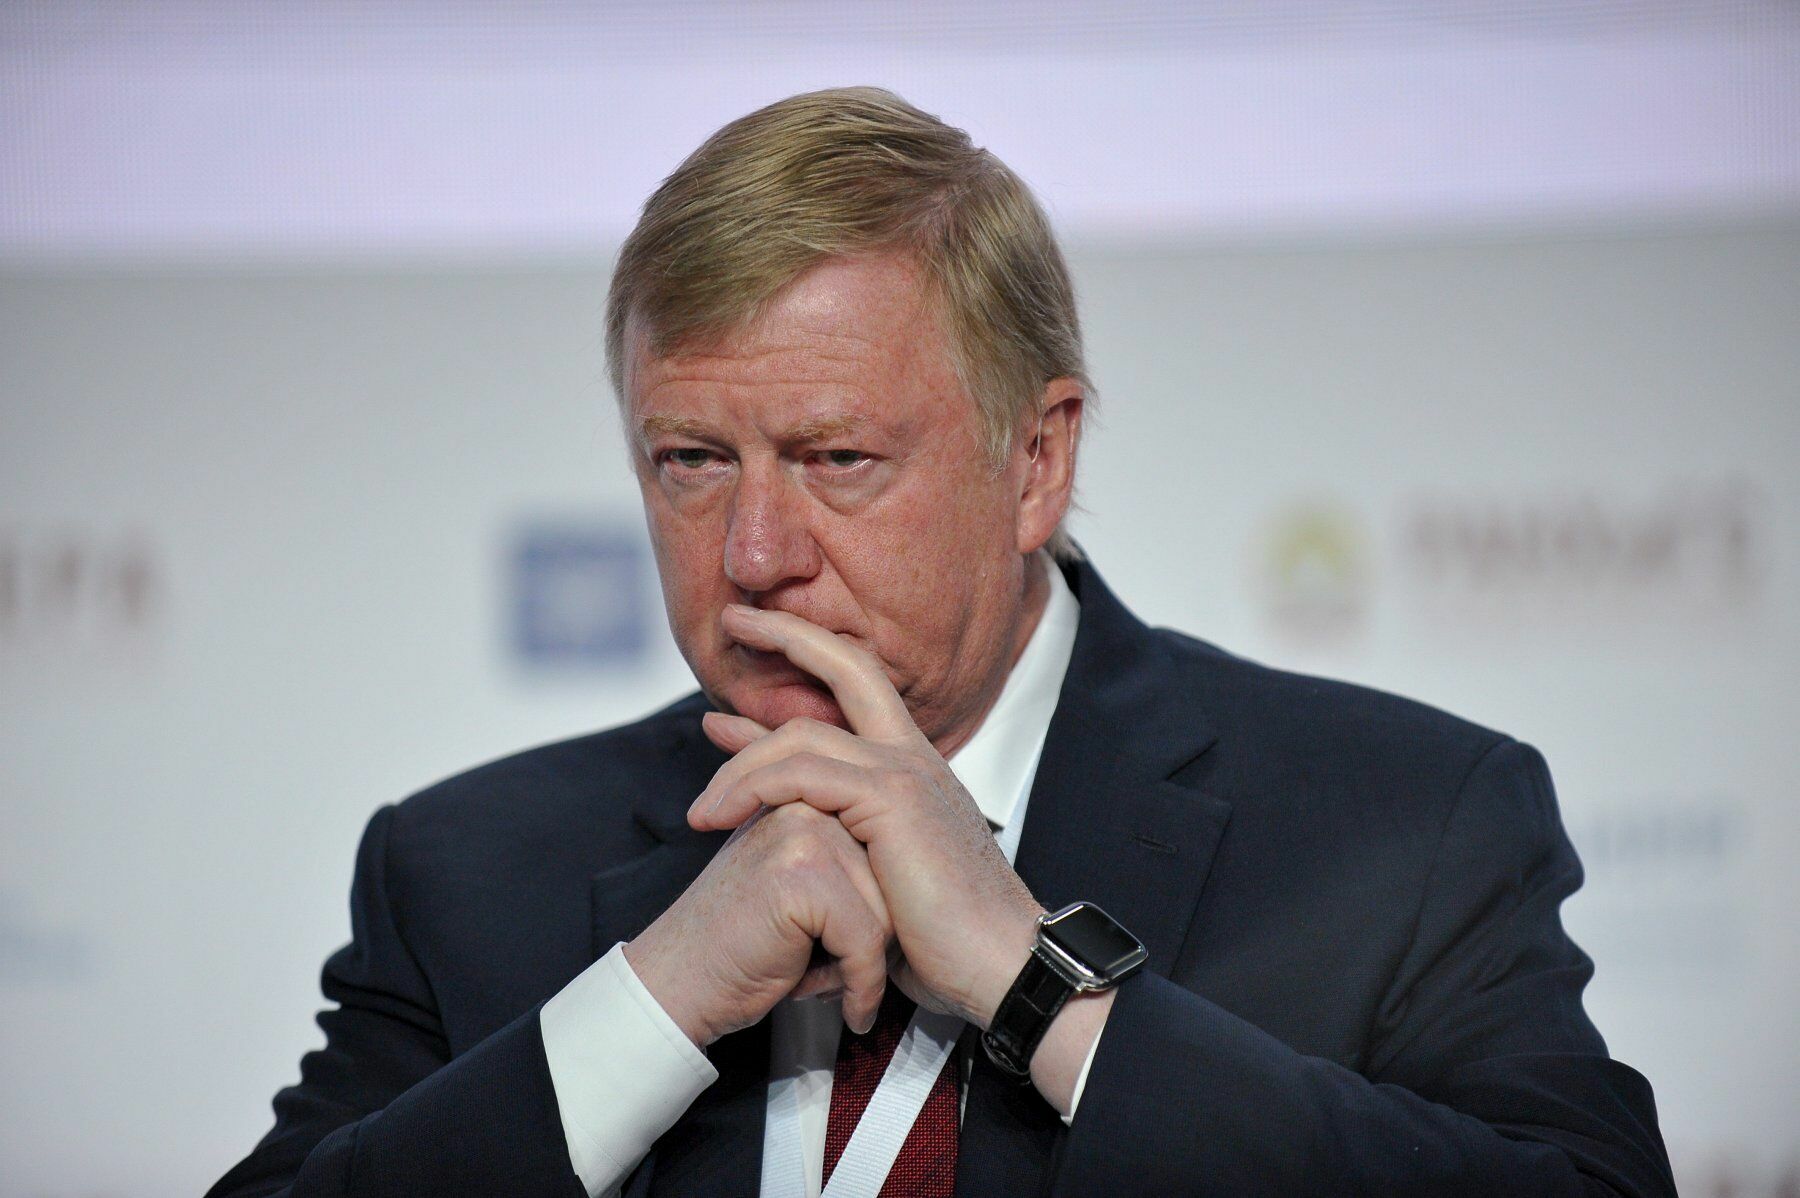 Bloomberg announced the departure of Anatoly Chubais from Russia